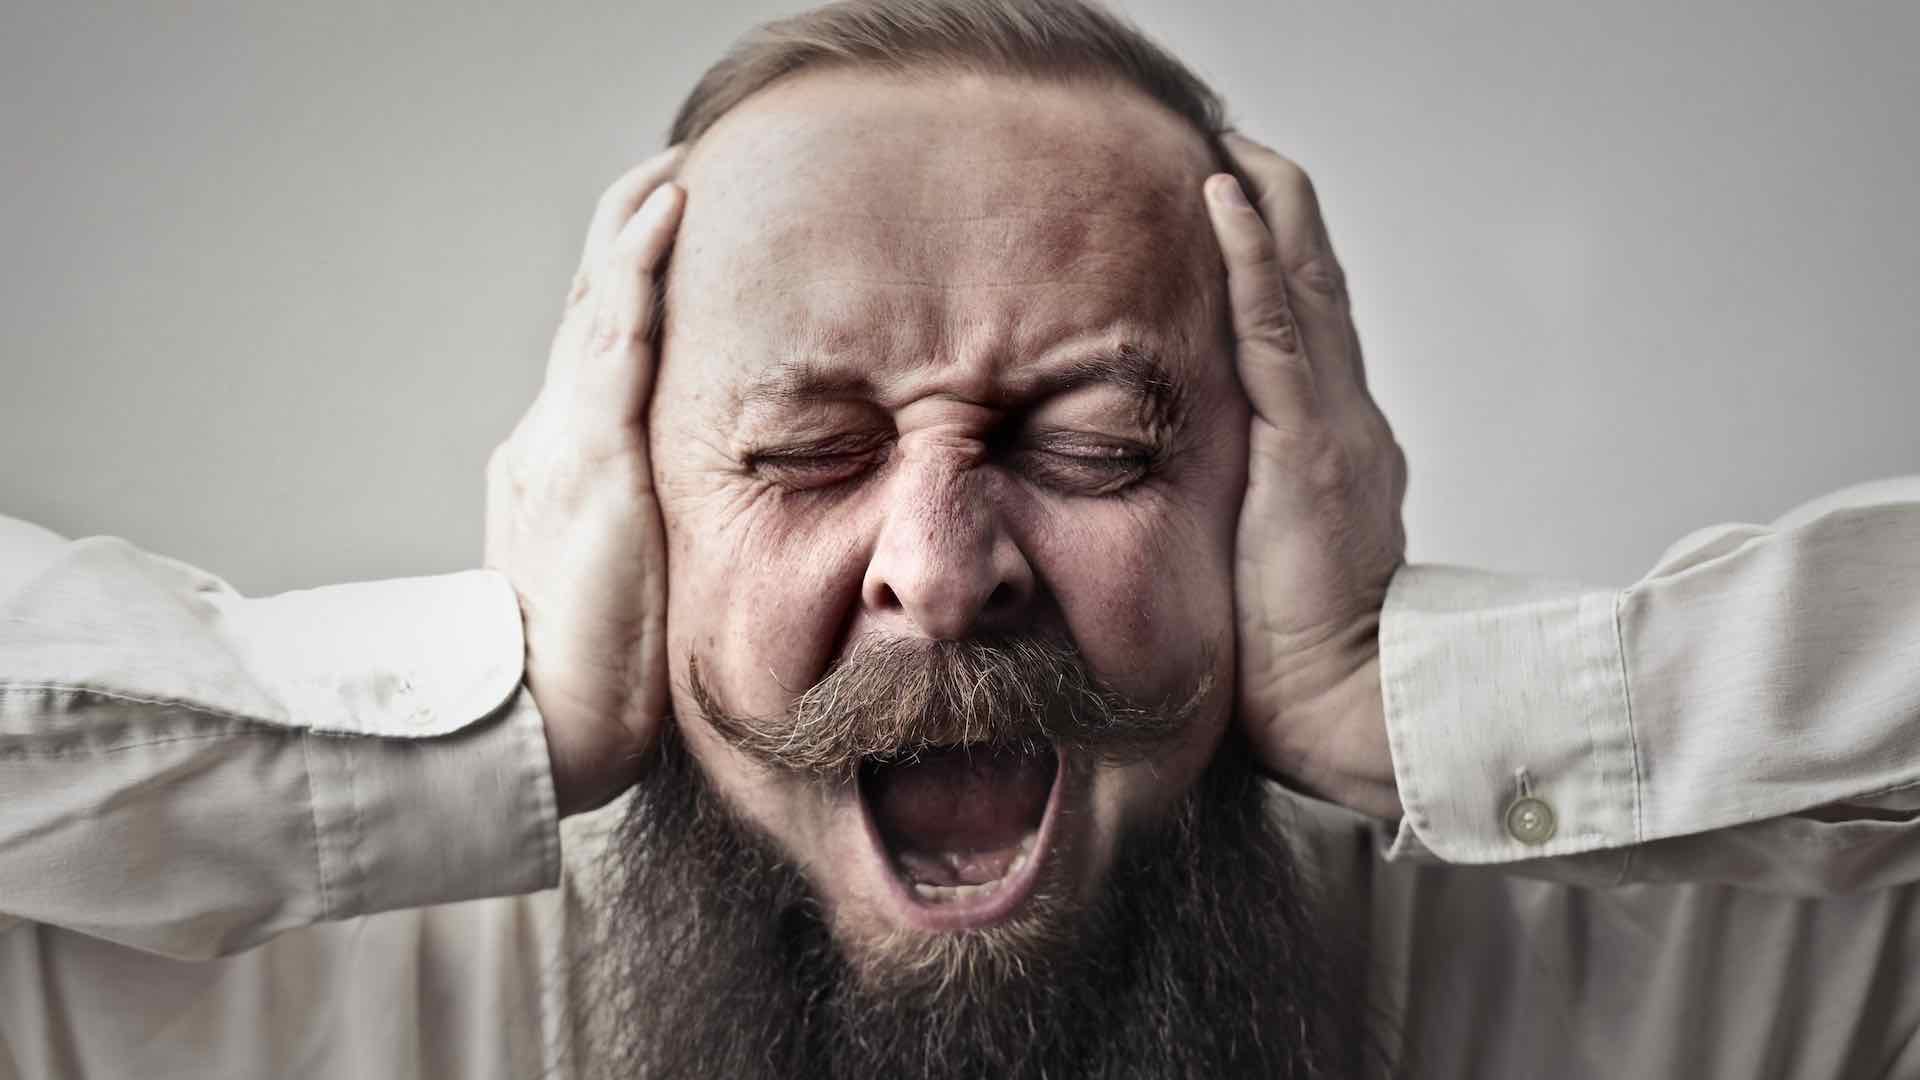 A man holding his ear and looking stressed out.